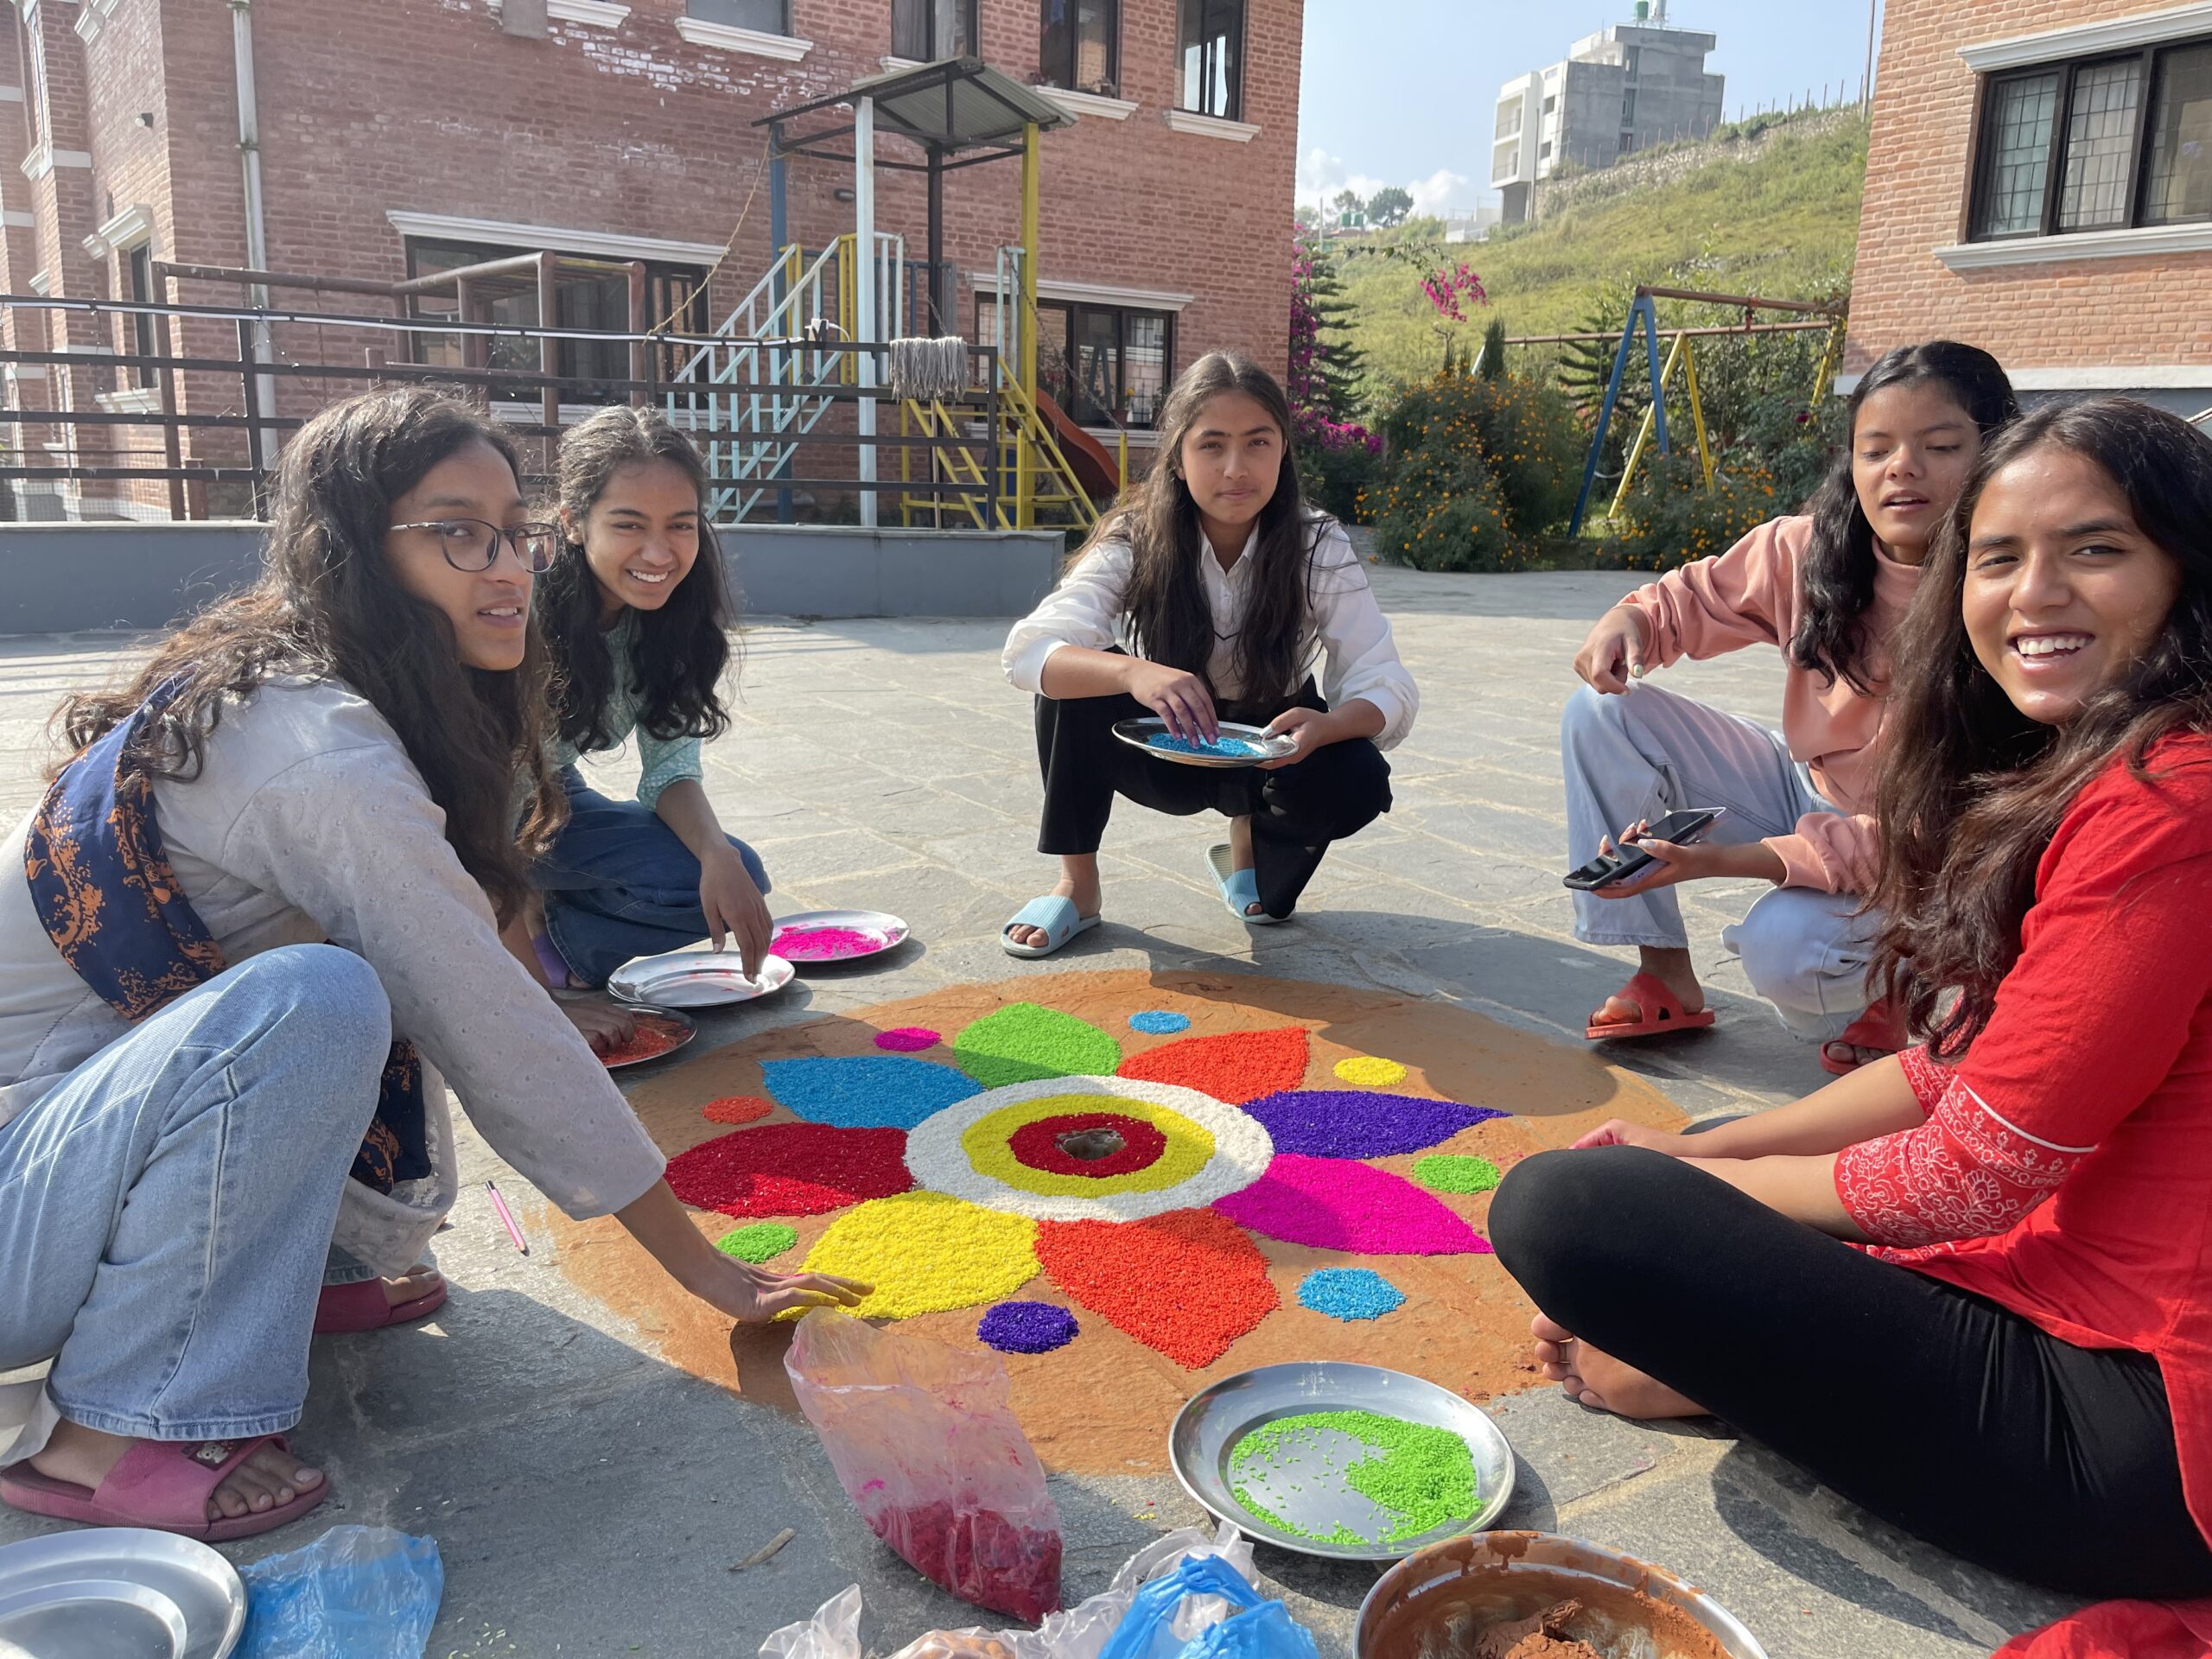 It's tradition for some of the Olgapuri kids to perfect a colorful sand mandala in the courtyard before the Bhai Tika ceremony begins.